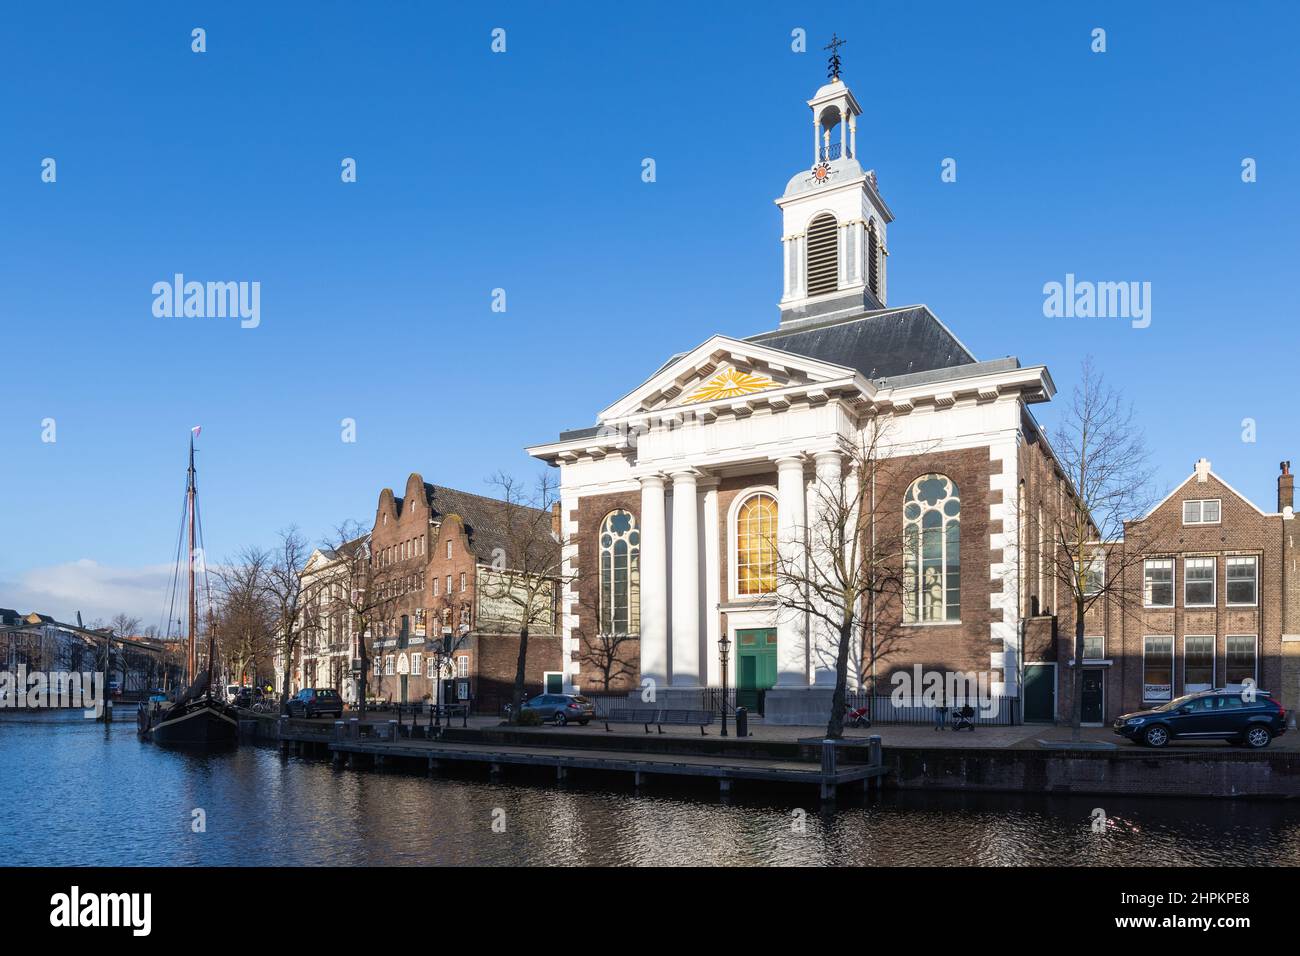 The Korenbeurs ( or corn exchange) building the hosts the public library in Schiedam, the Netherlands Stock Photo